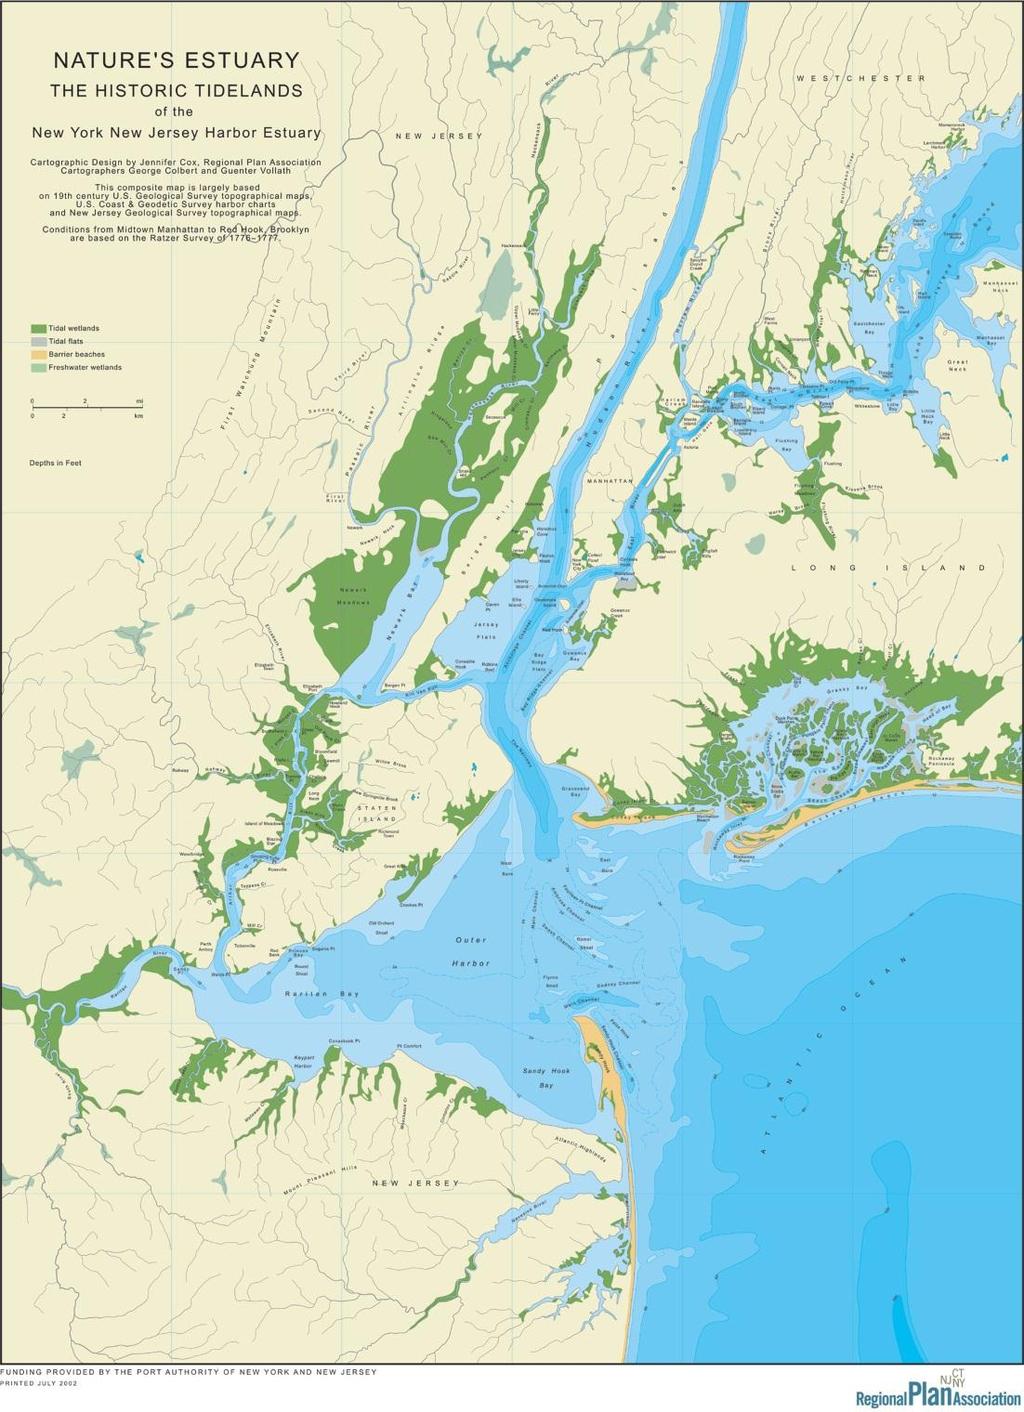 New York-New Jersey Harbor Estuary Wetlands Green Shading represents shoreline of New York City and surrounding areas in late 1800 s system has been drastically altered.